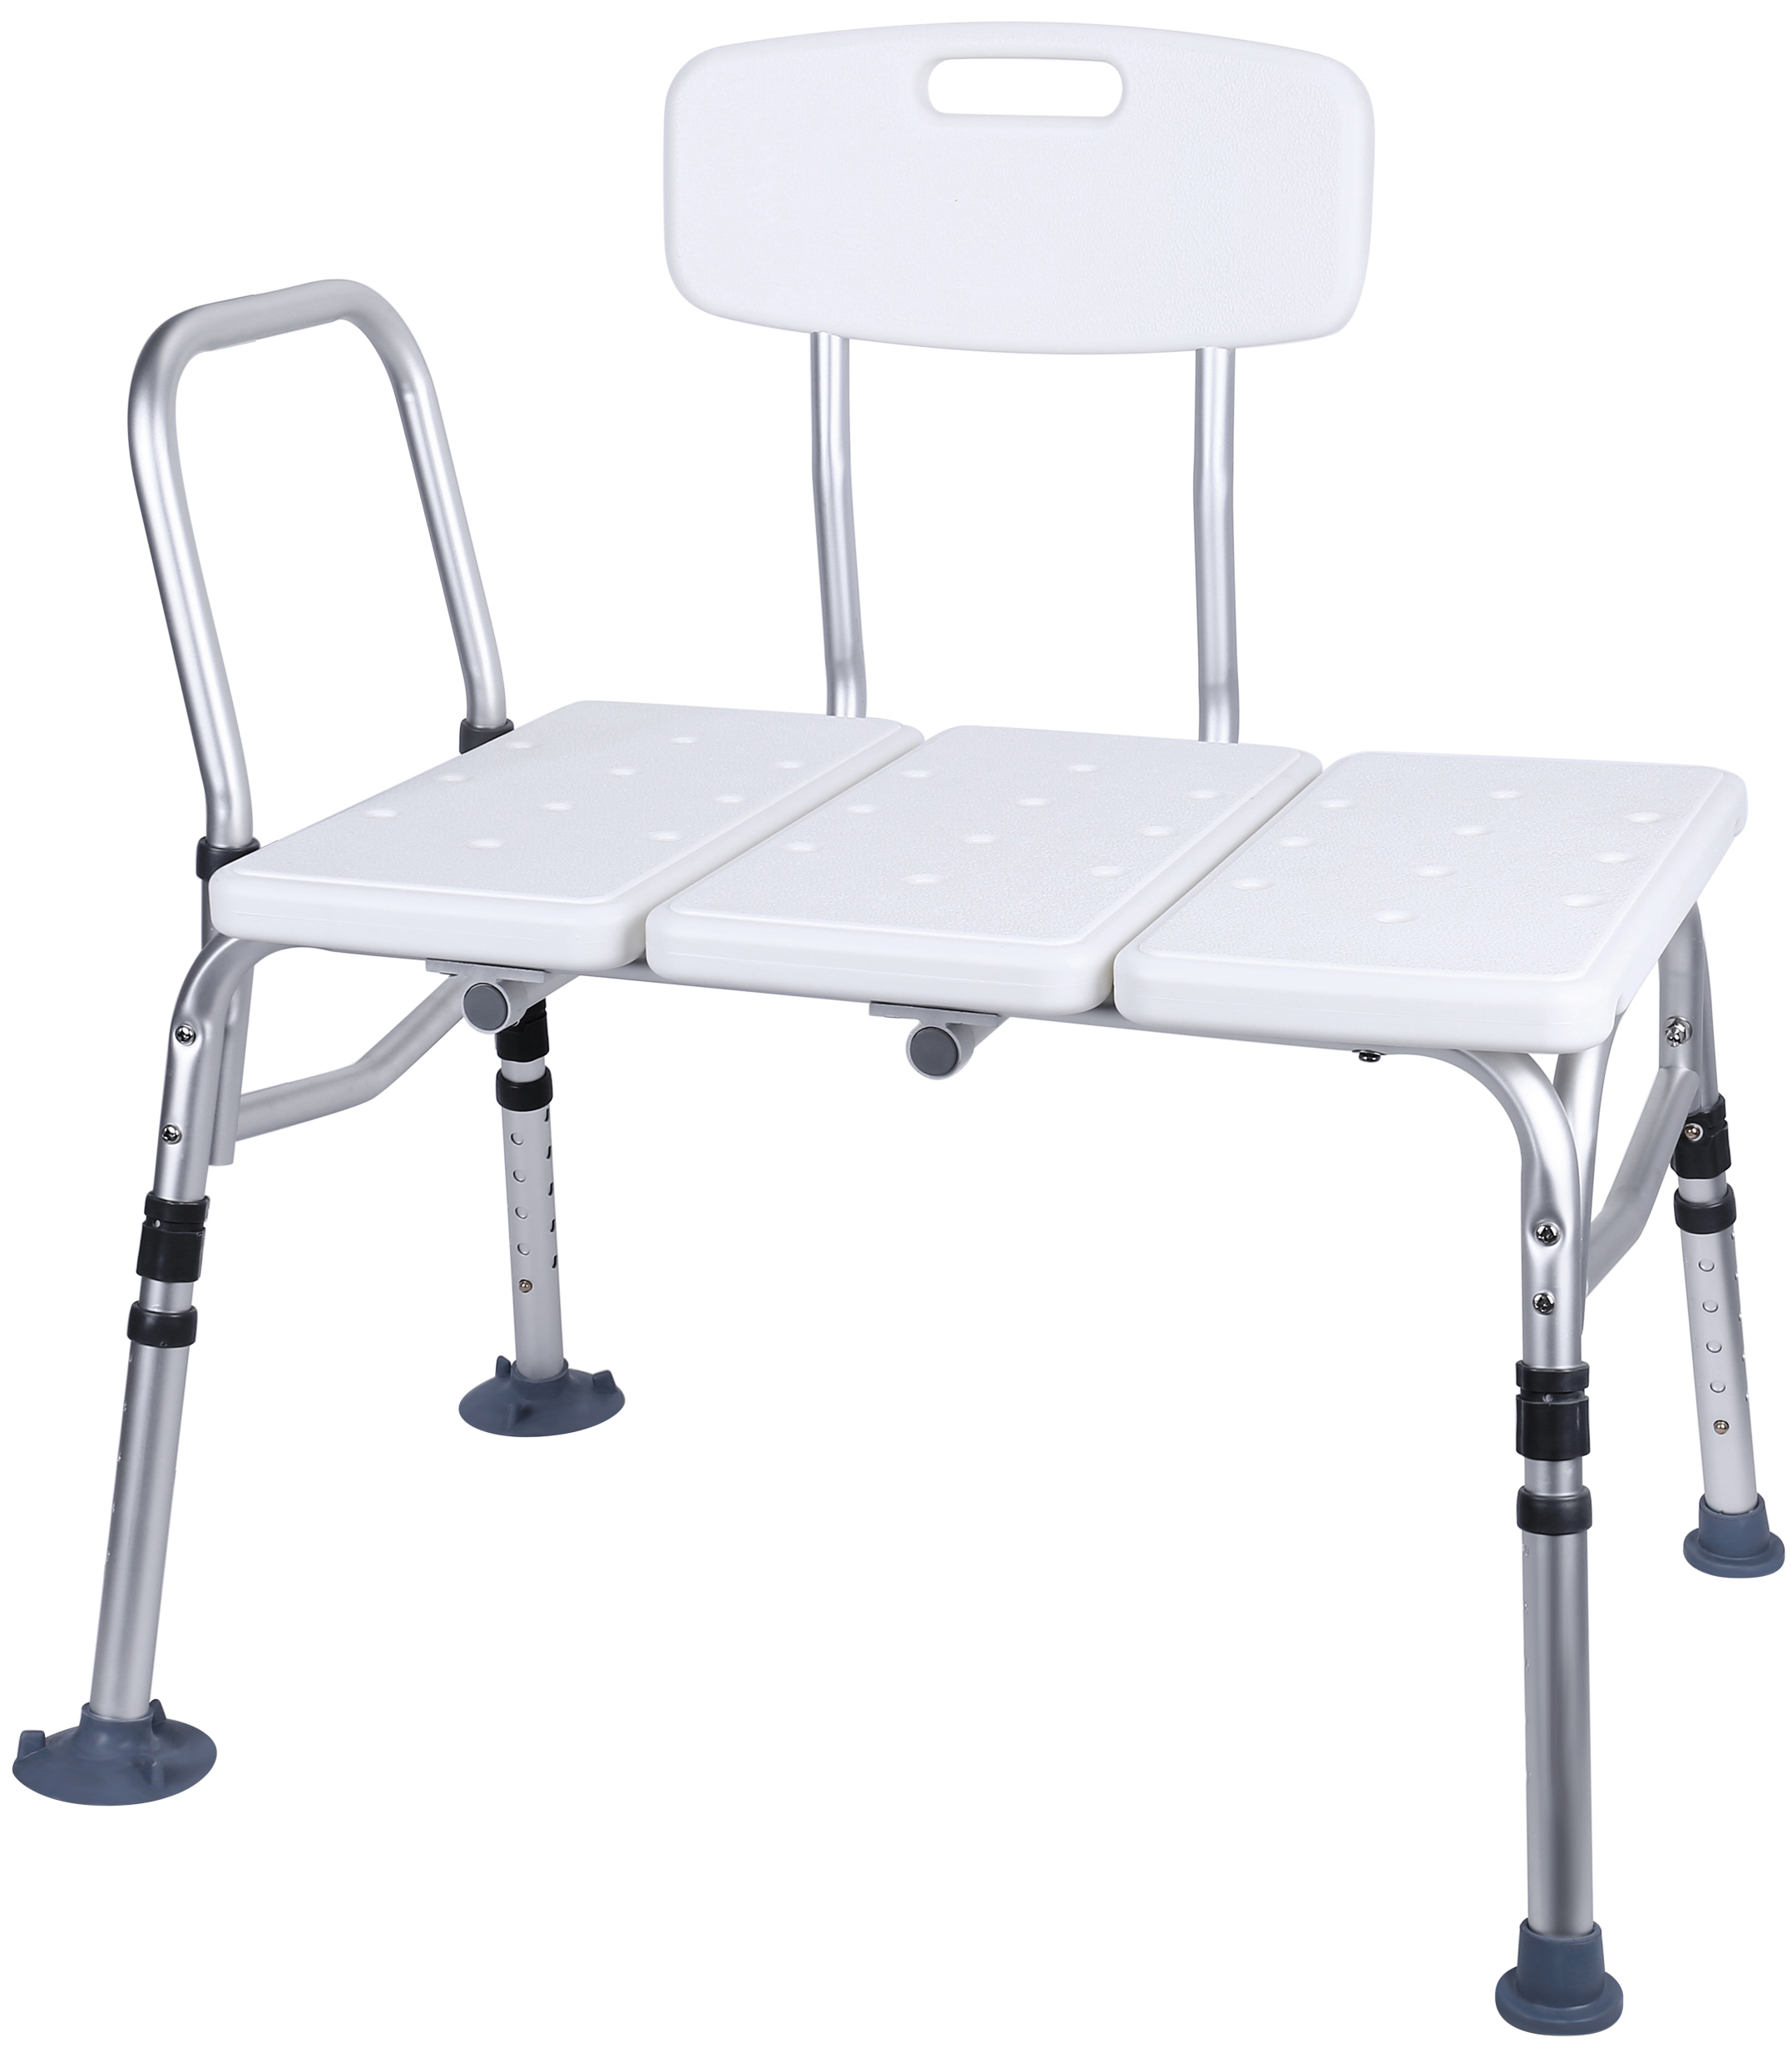 Everyday Essentials Adjustable Height Bath Shower Tub Bench Chair with Adjustable Backrest - image 3 of 5